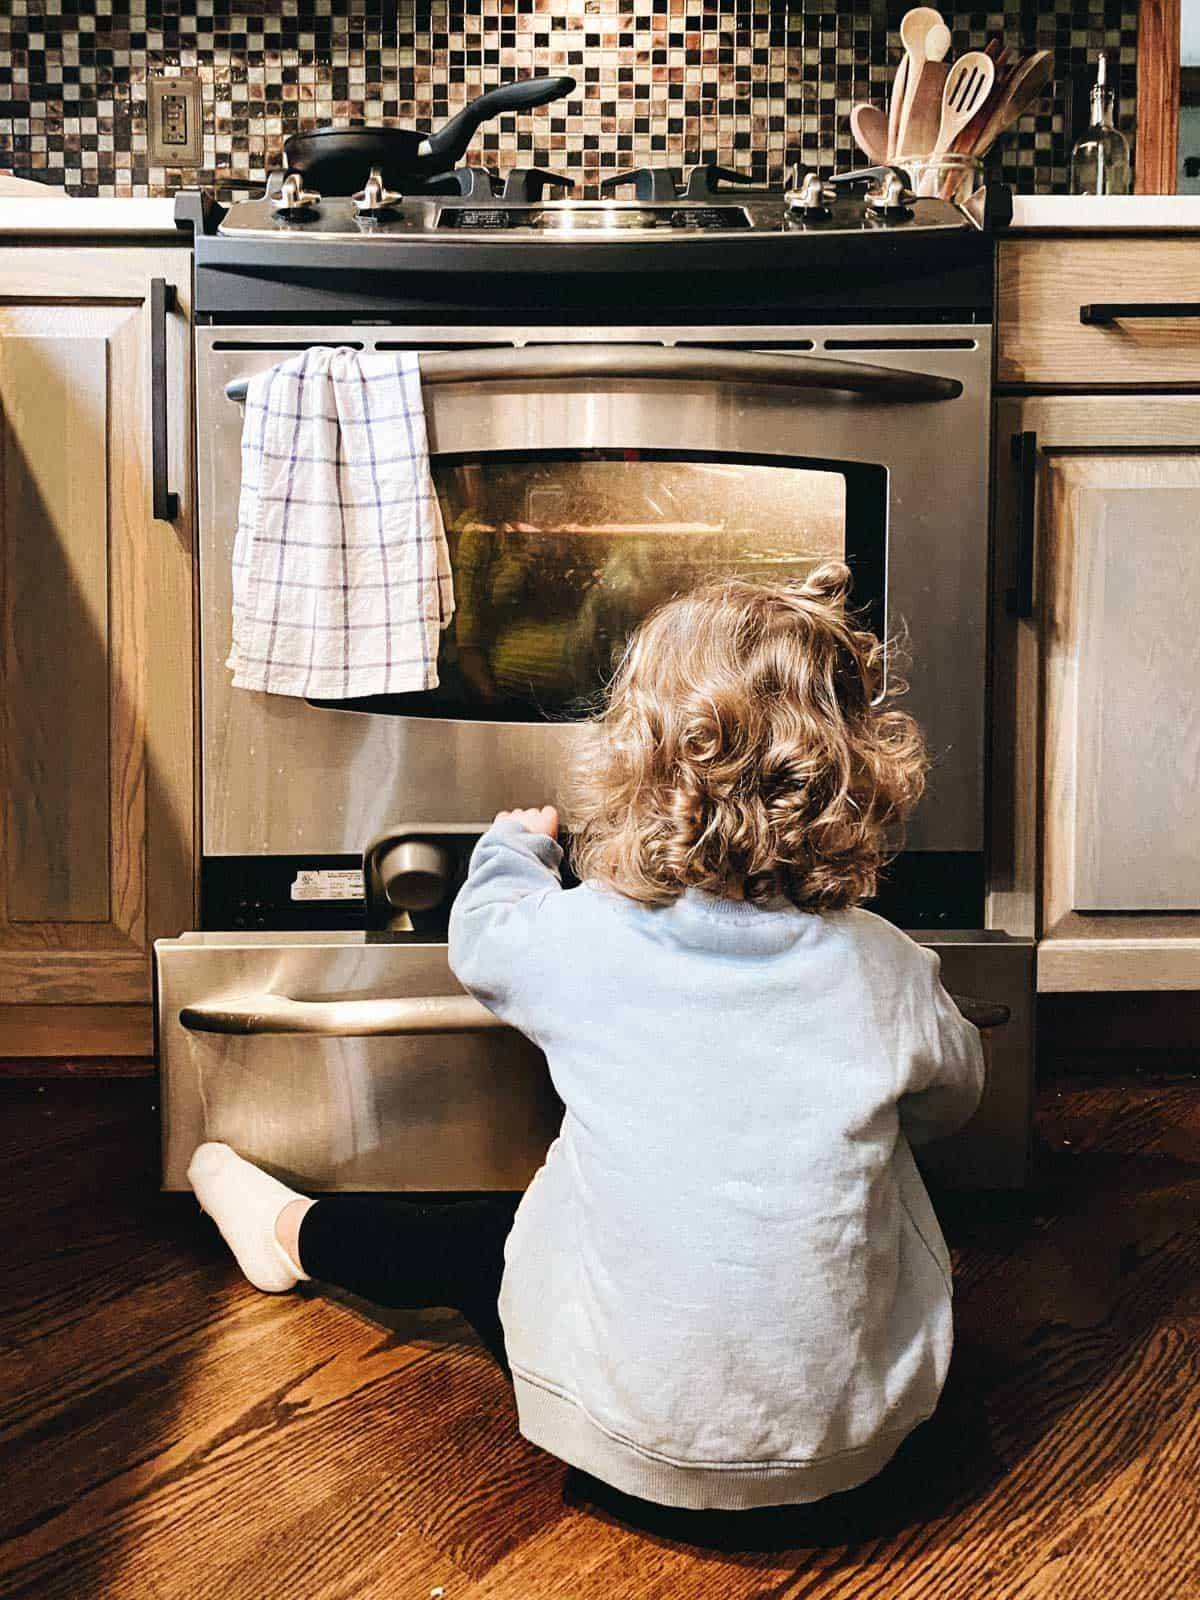 A child playing in the pullout storage area under an oven.